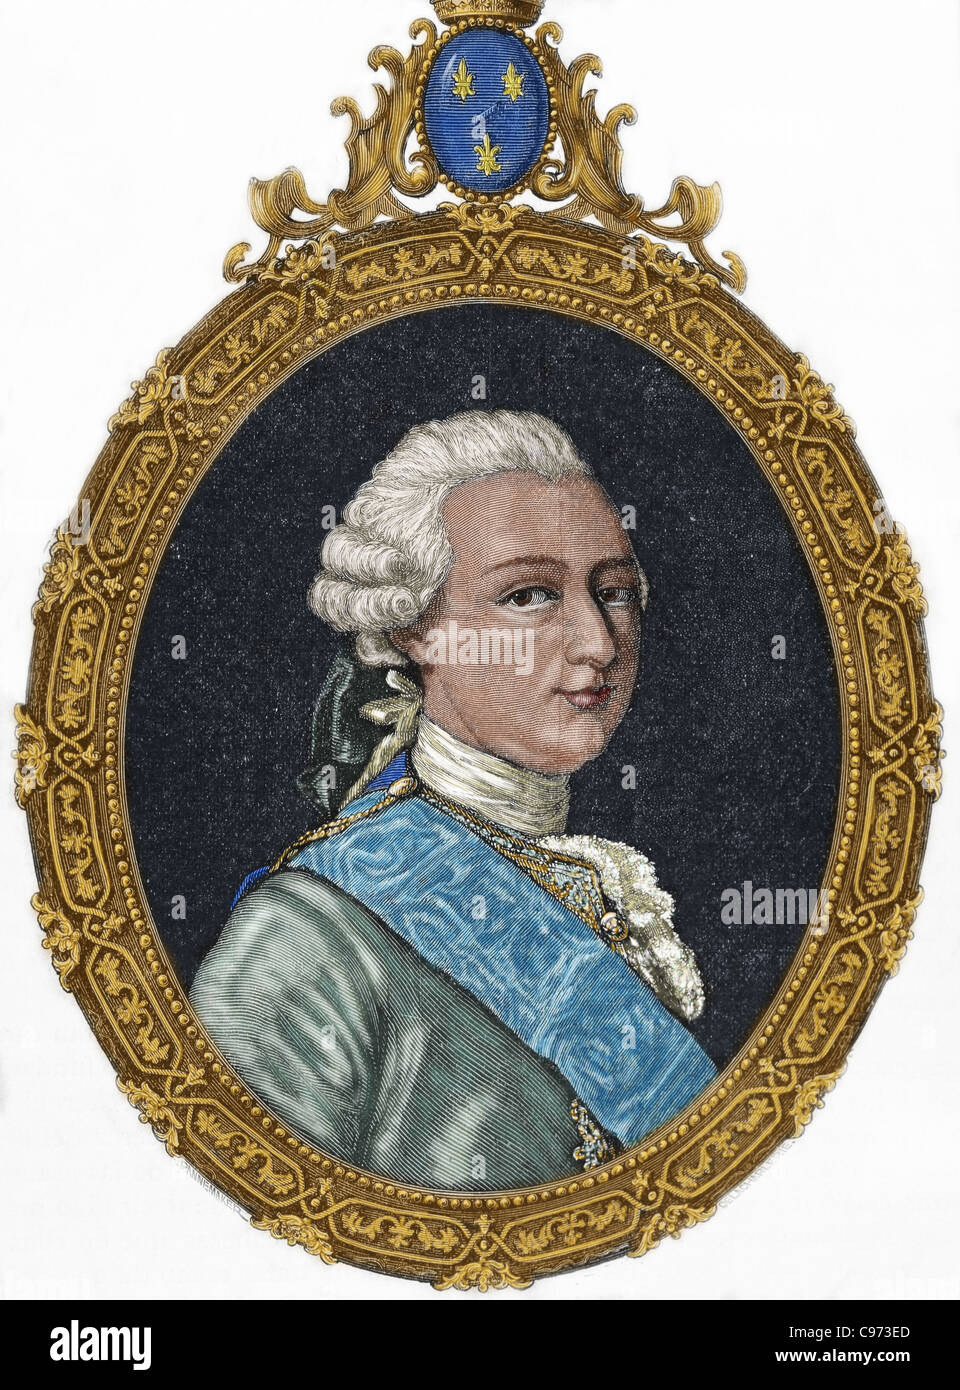 Louis Joseph de Bourbon (1736-1818), Prince of Conde from 1740 to his death. Colored engraving. Stock Photo